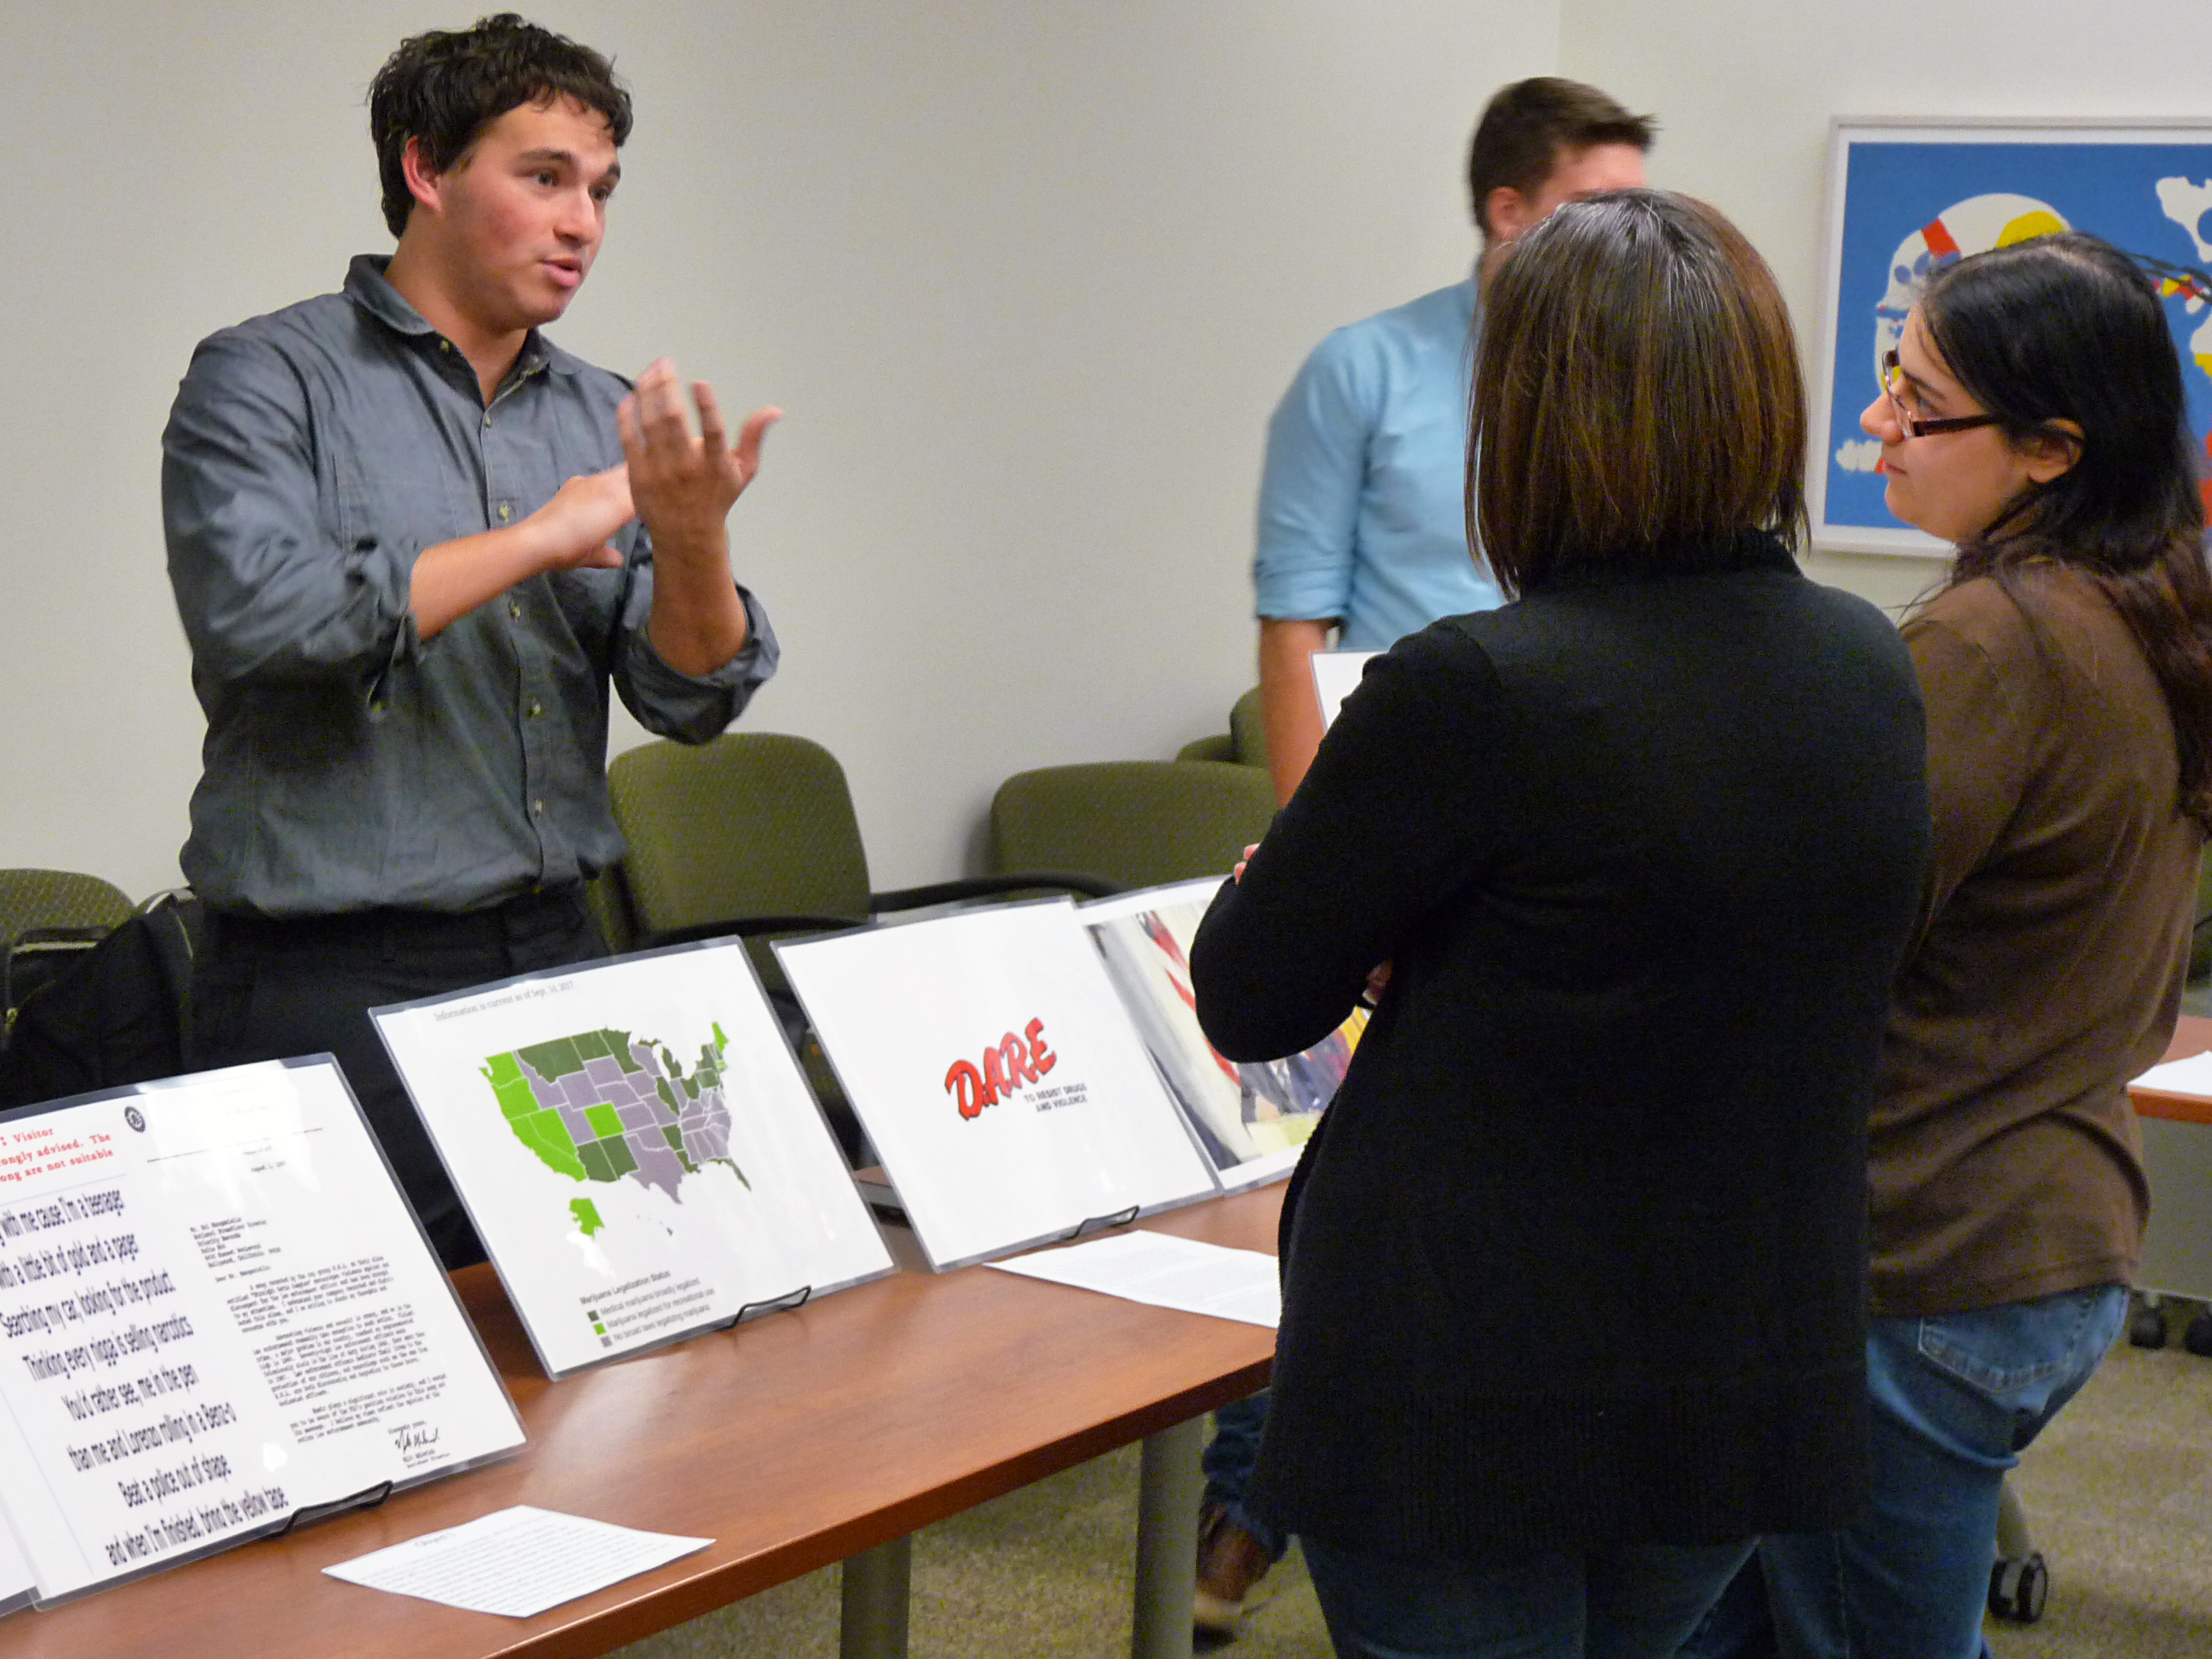 A student discusses his criminal justice research with community members